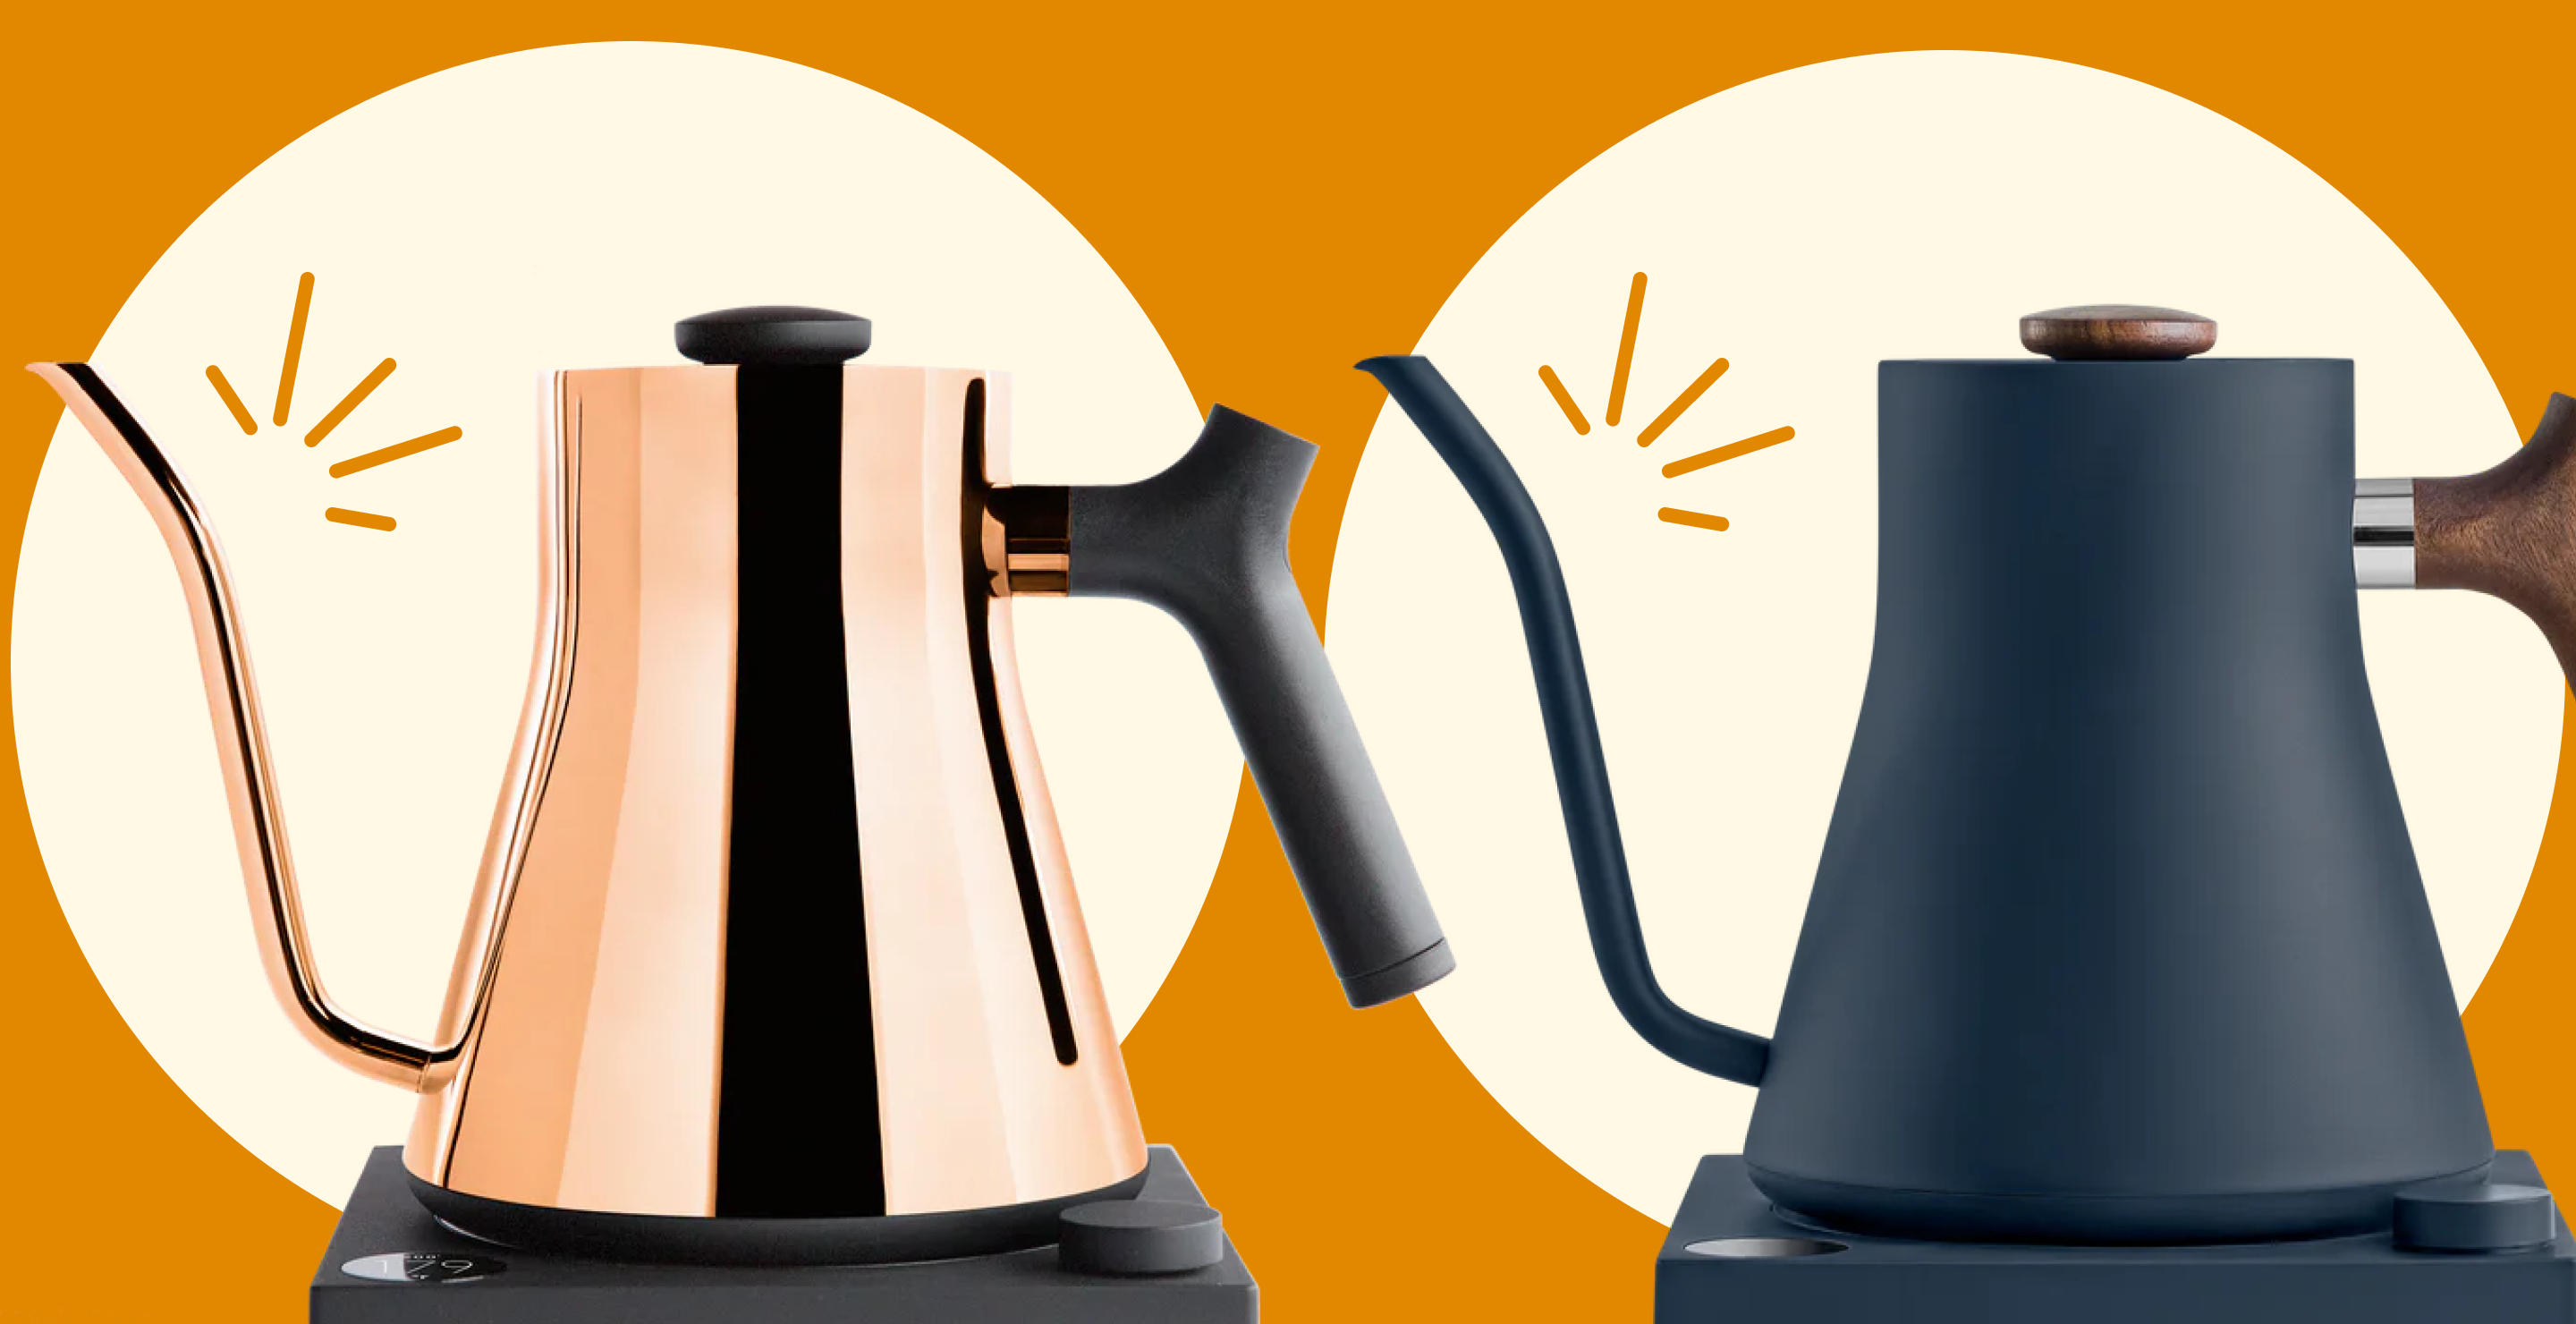 Pour Over Gooseneck Kettle by Alpha & Sigma [Includes Free eBook